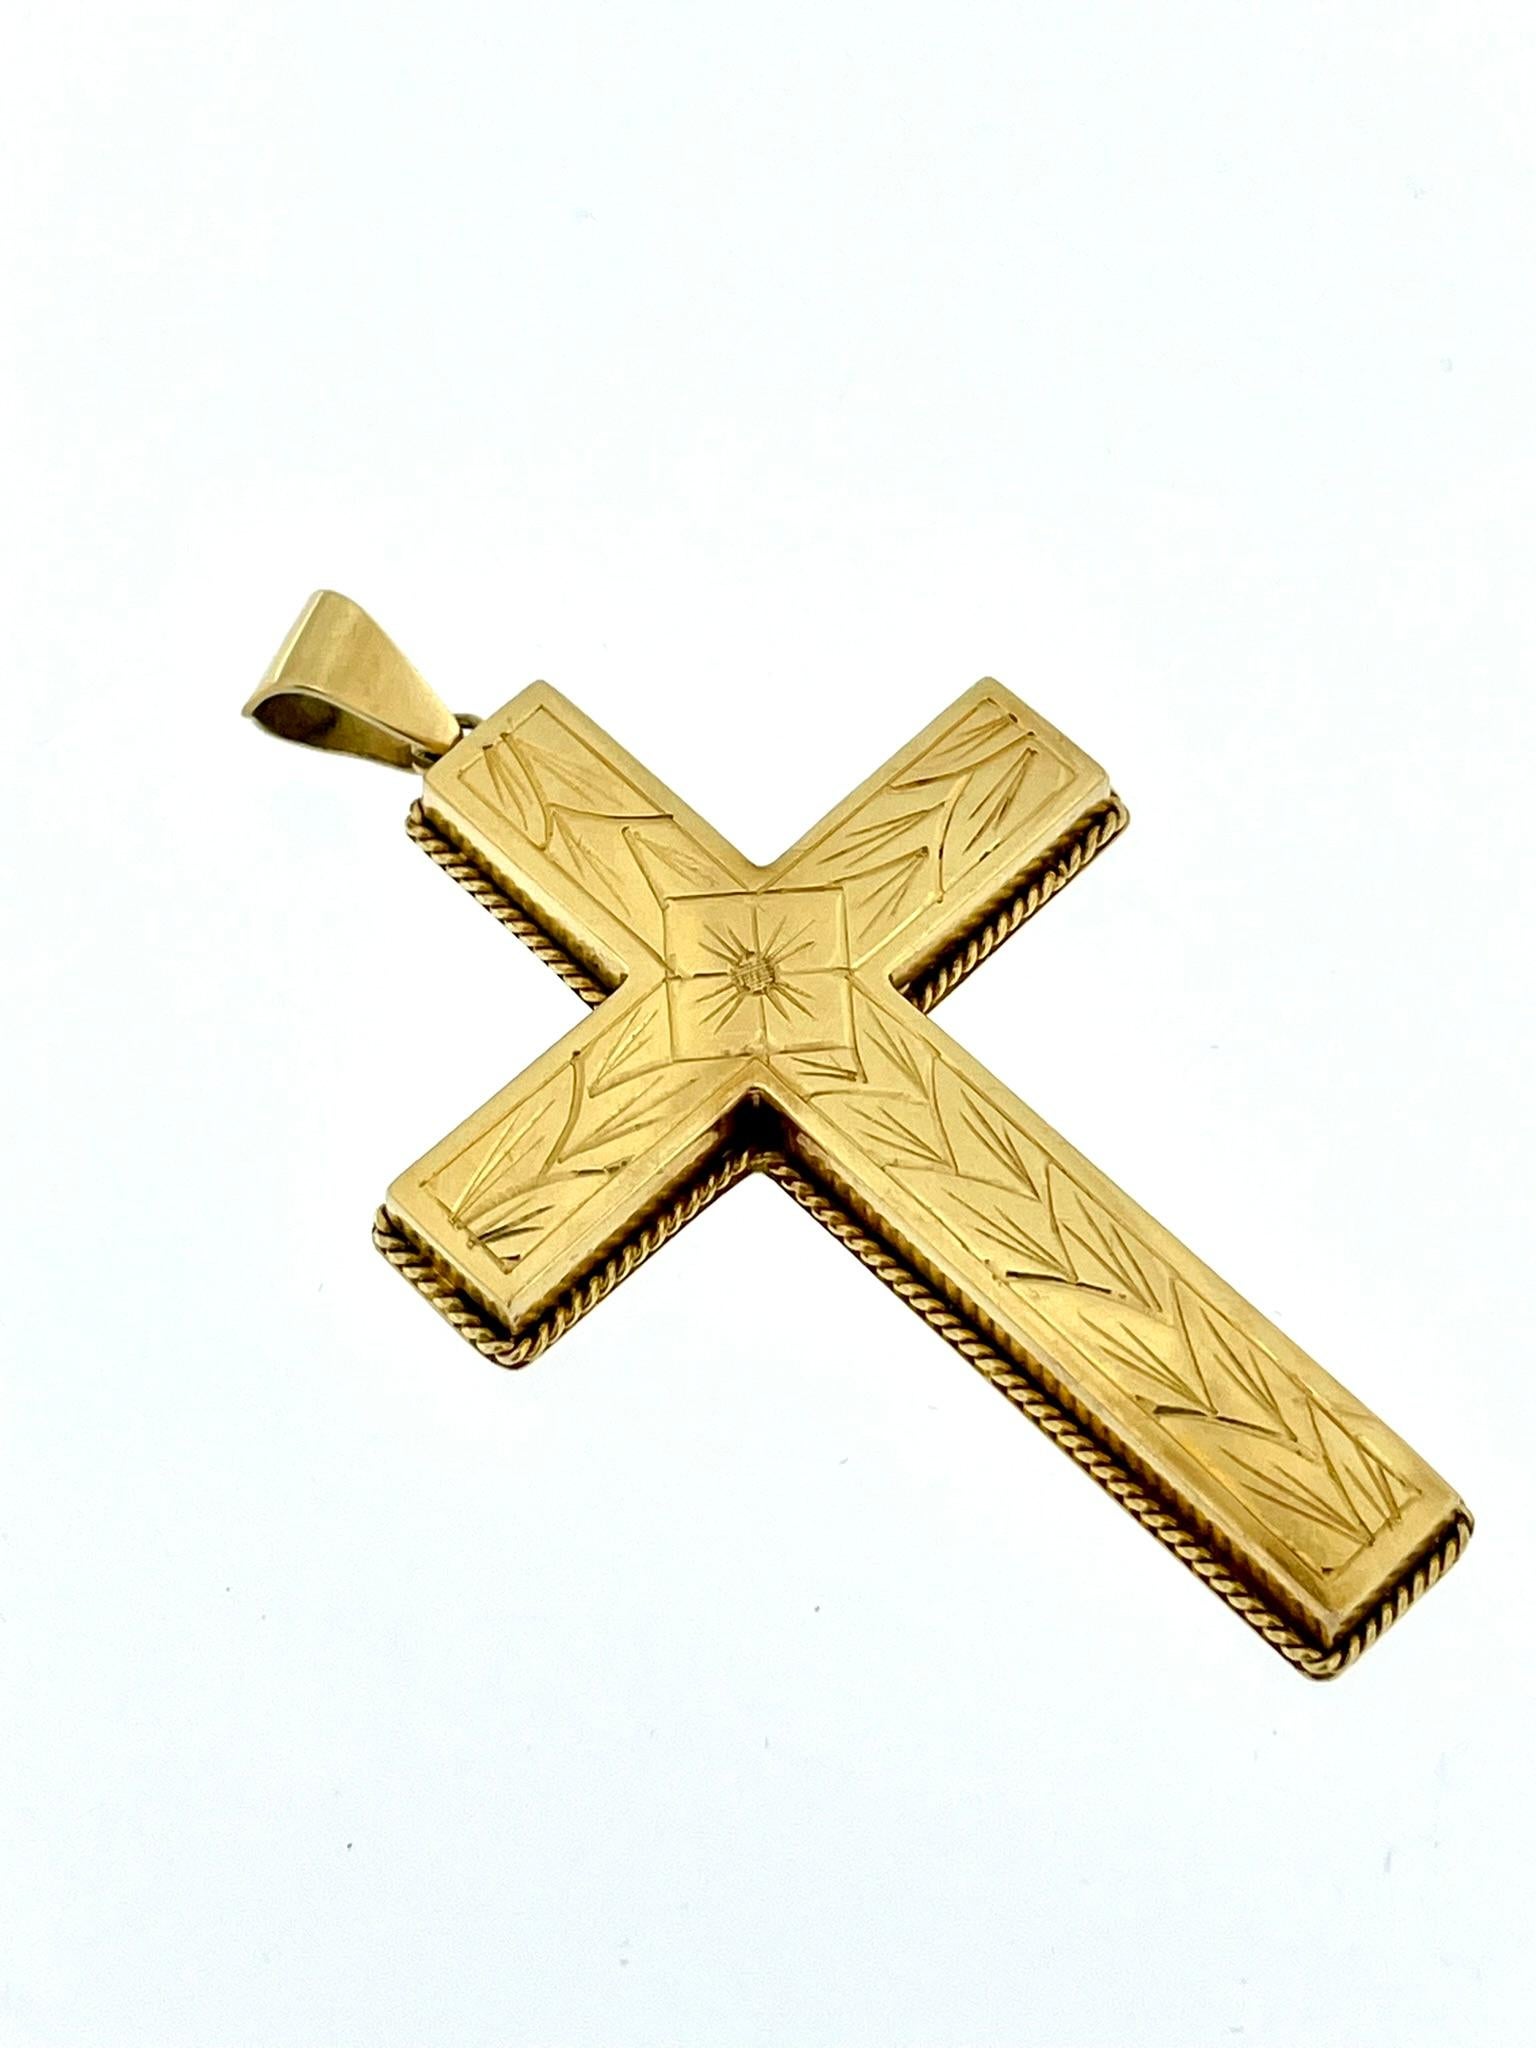 Artisan Swiss 18kt Yellow Gold Cross with Flower Patterns For Sale